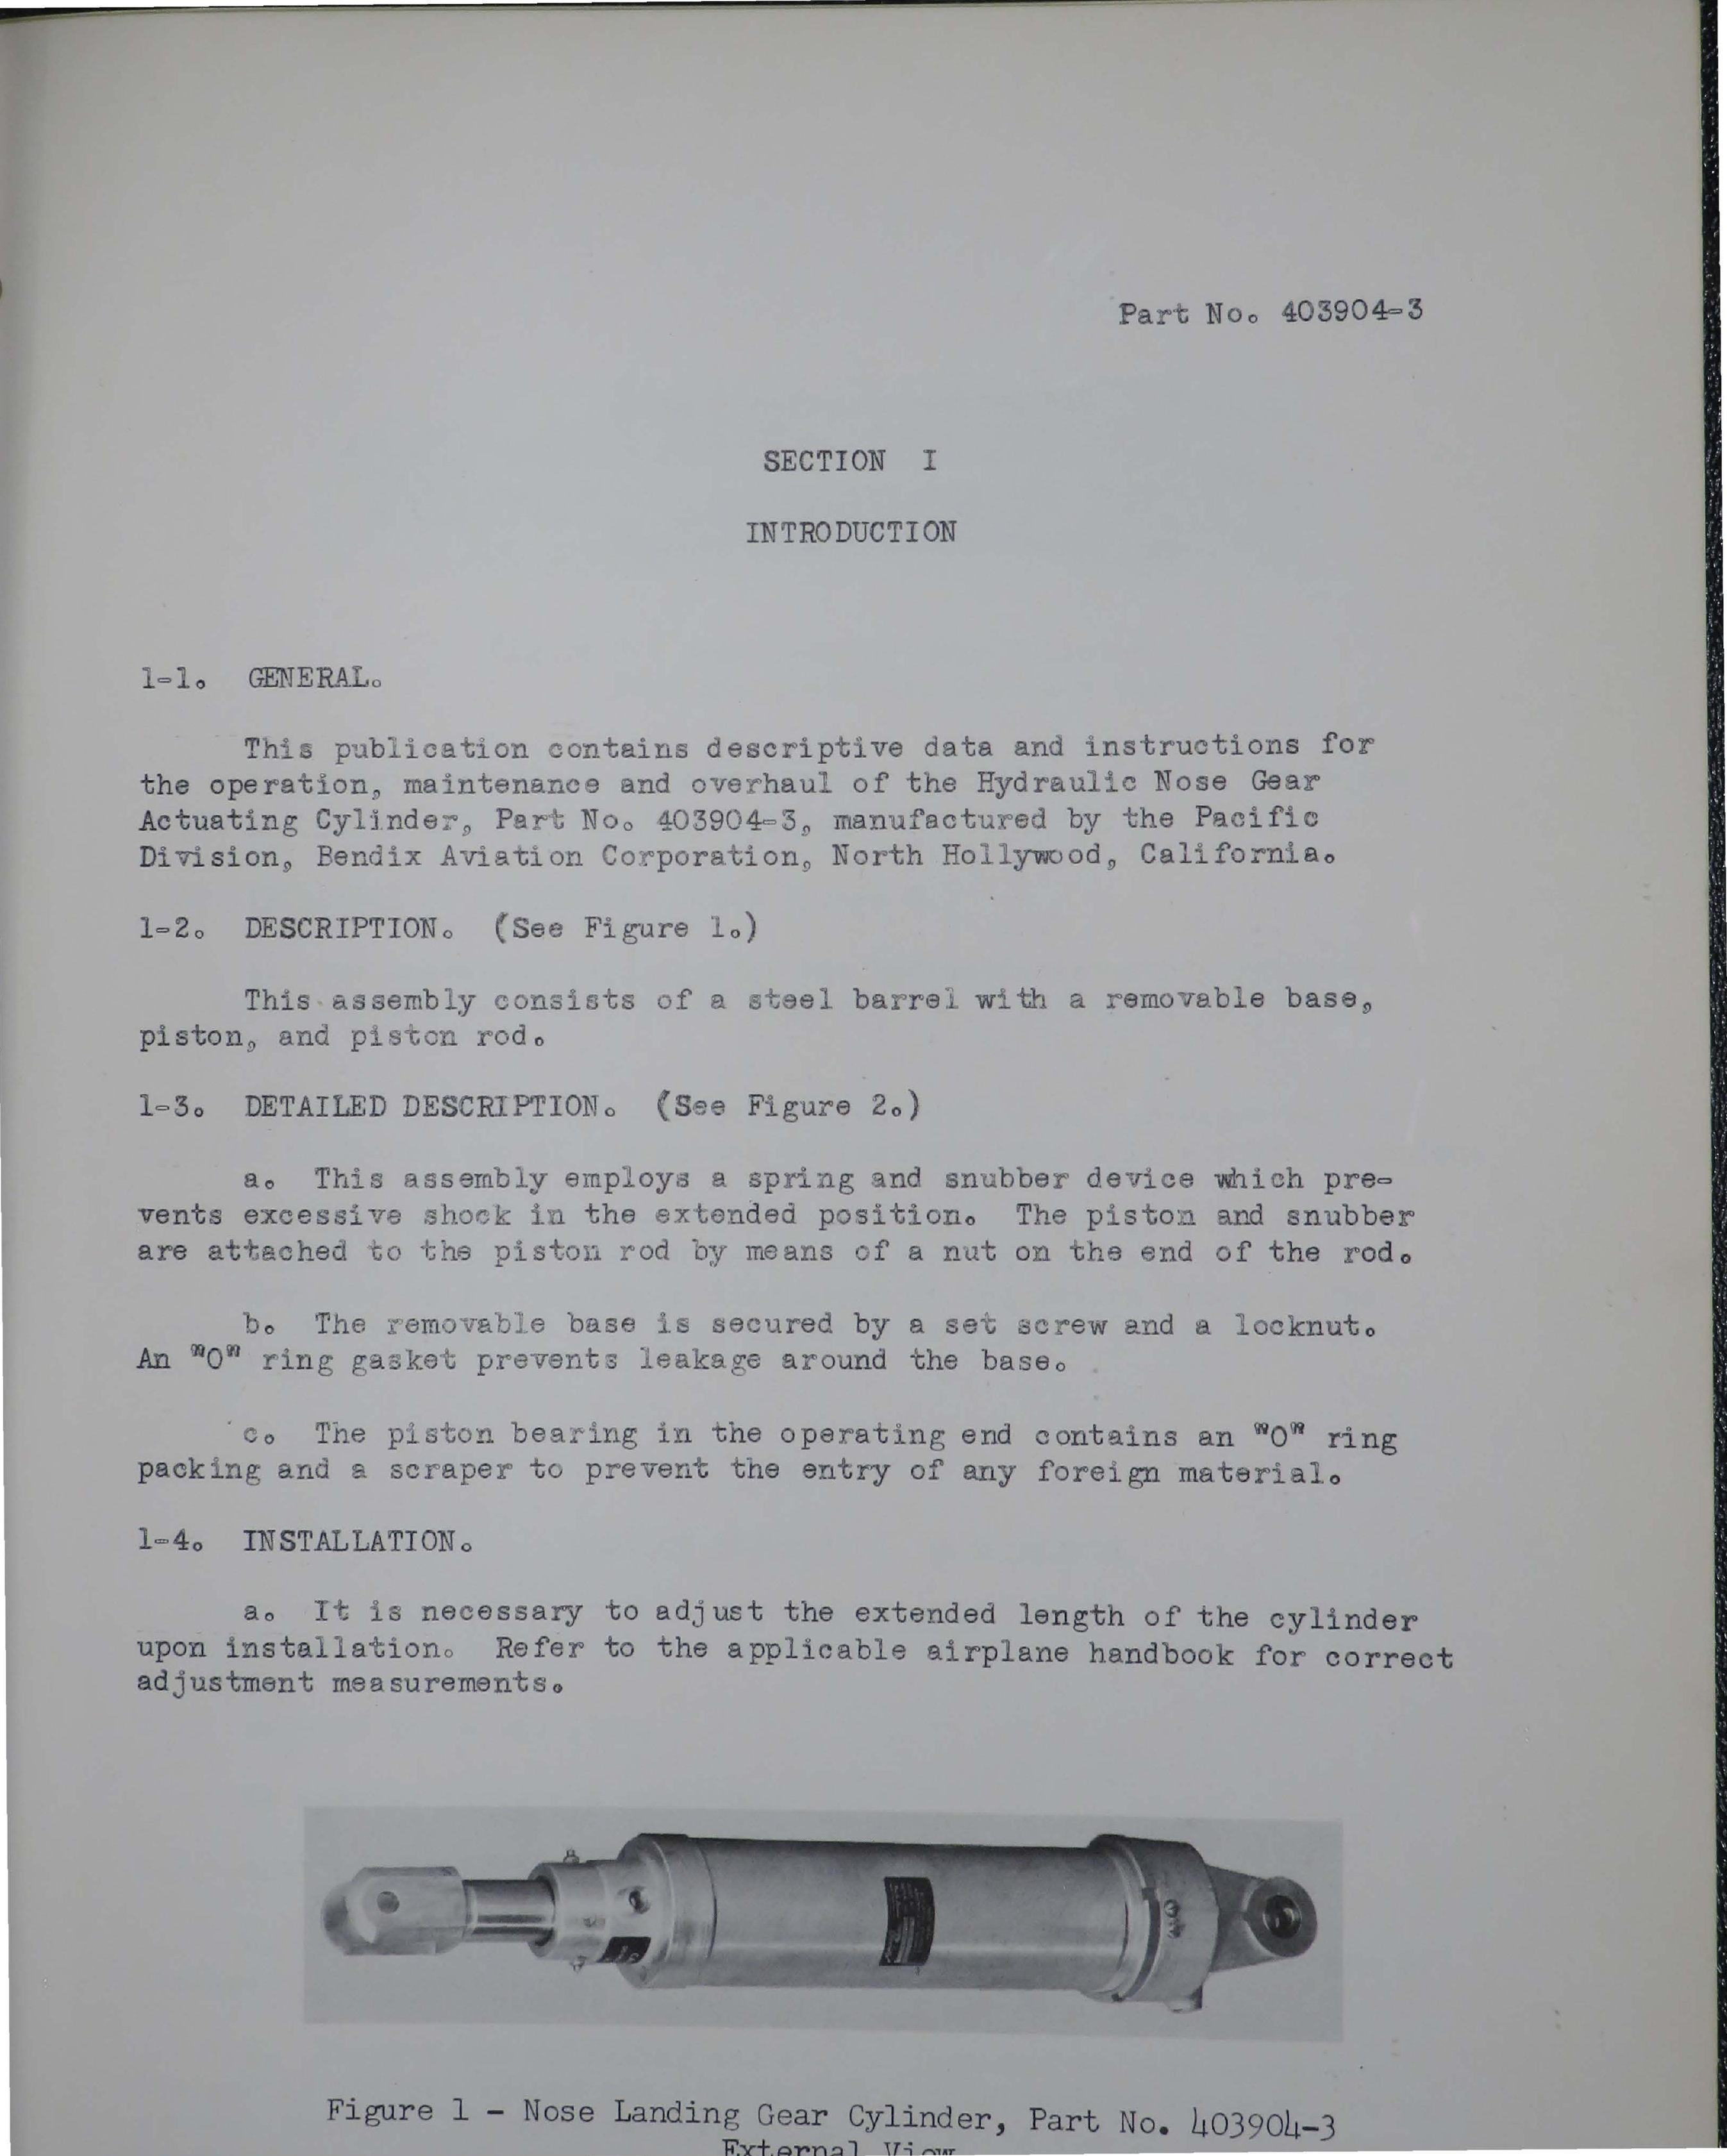 Sample page 7 from AirCorps Library document: Nose Landing Gear Actuating Cylinder - Part 403904-3